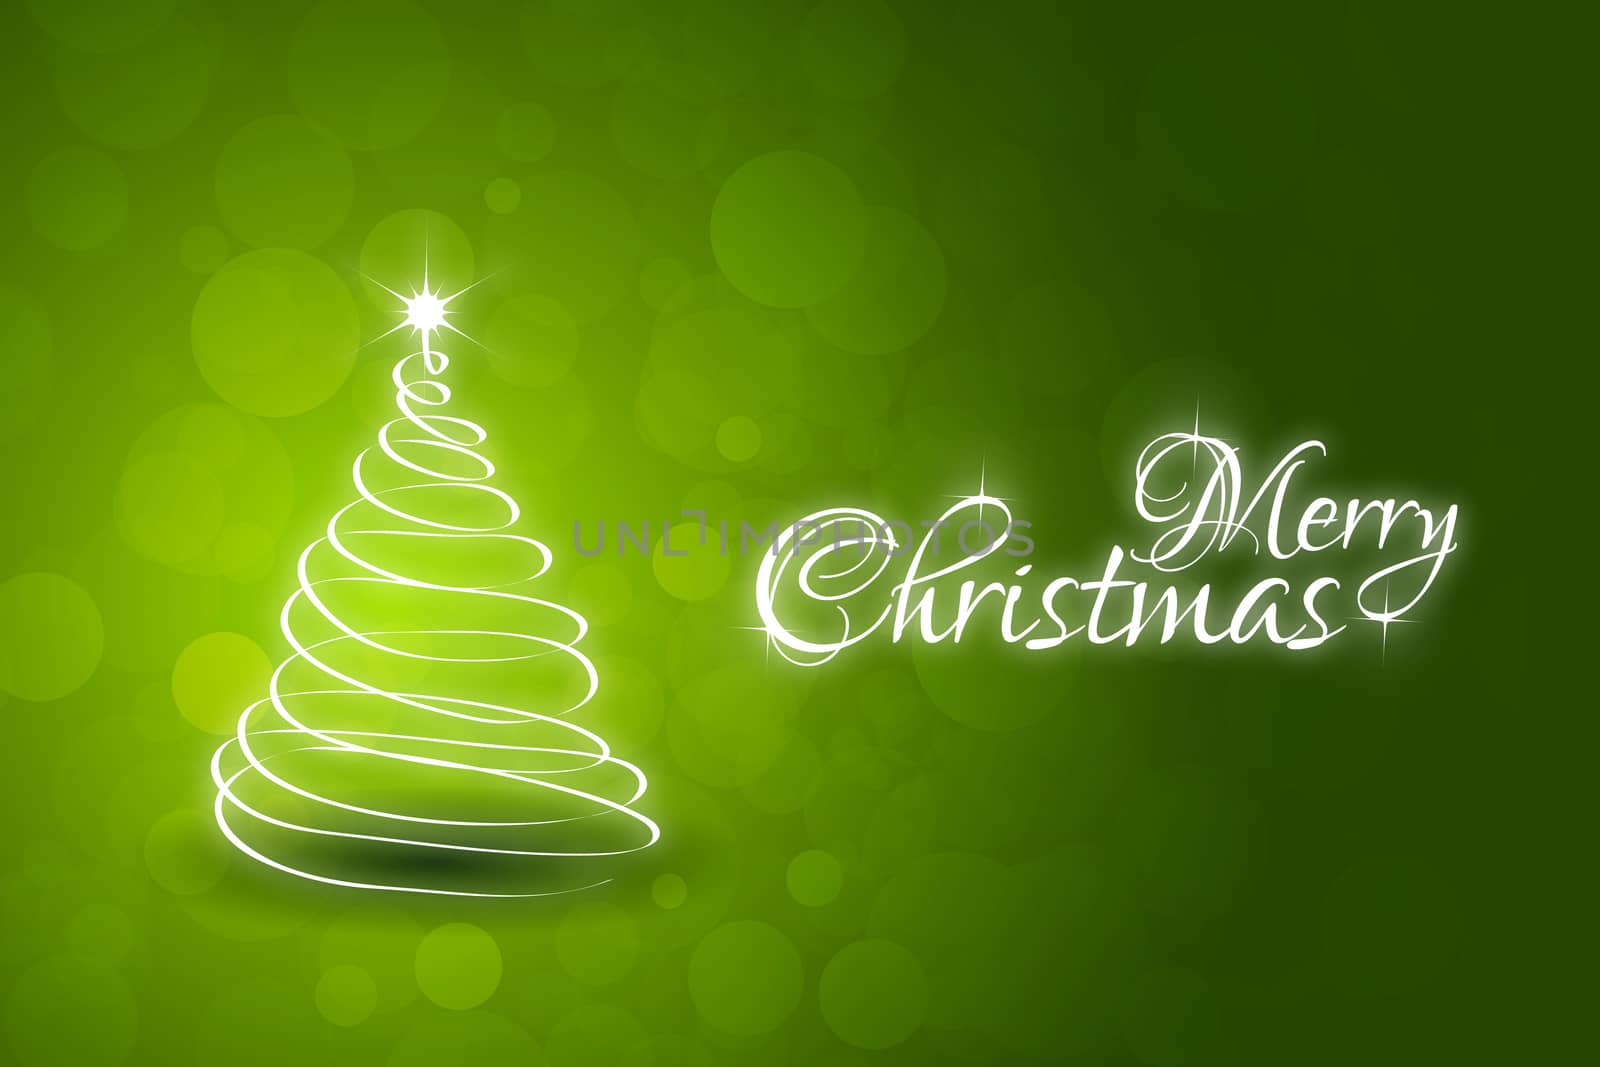 Green Christmas Card by WaD